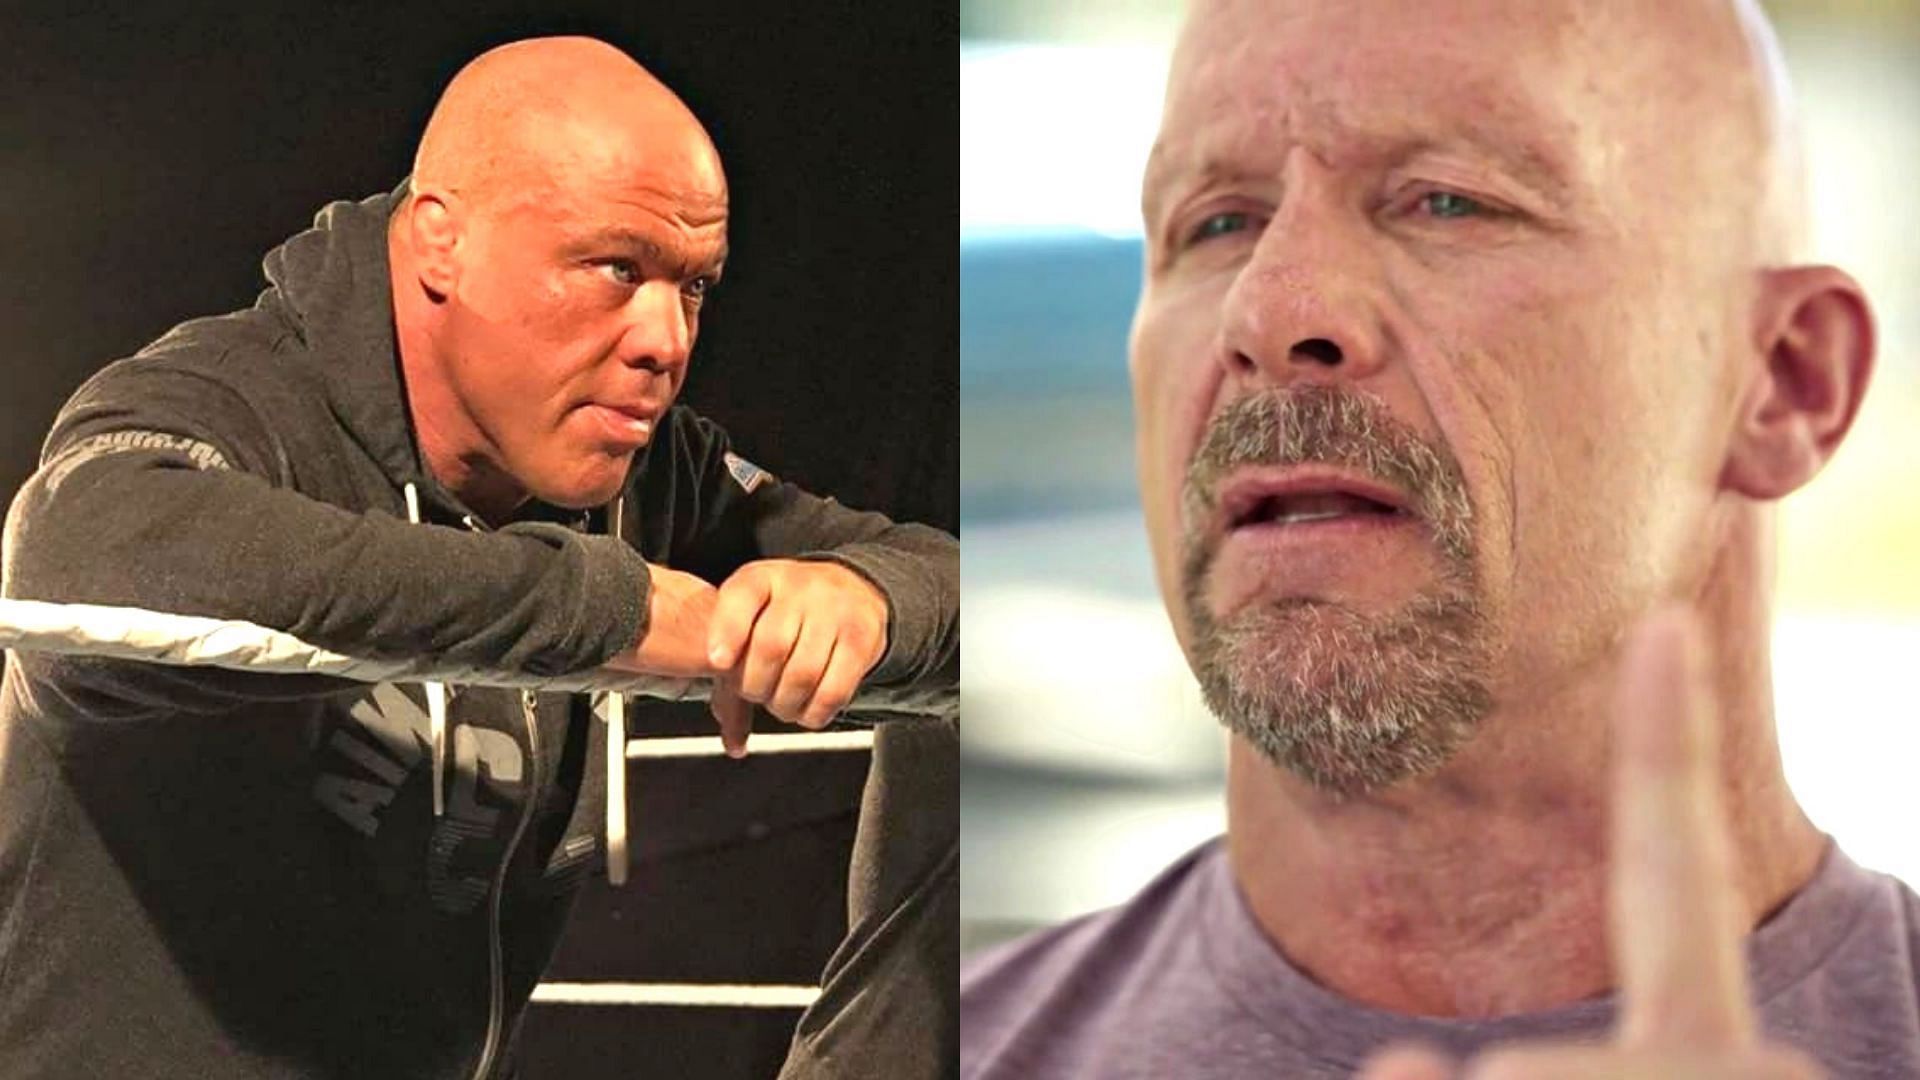 Kurt Angle and Stone Cold Steve Austin had some memorable feuds during their time in WWE.